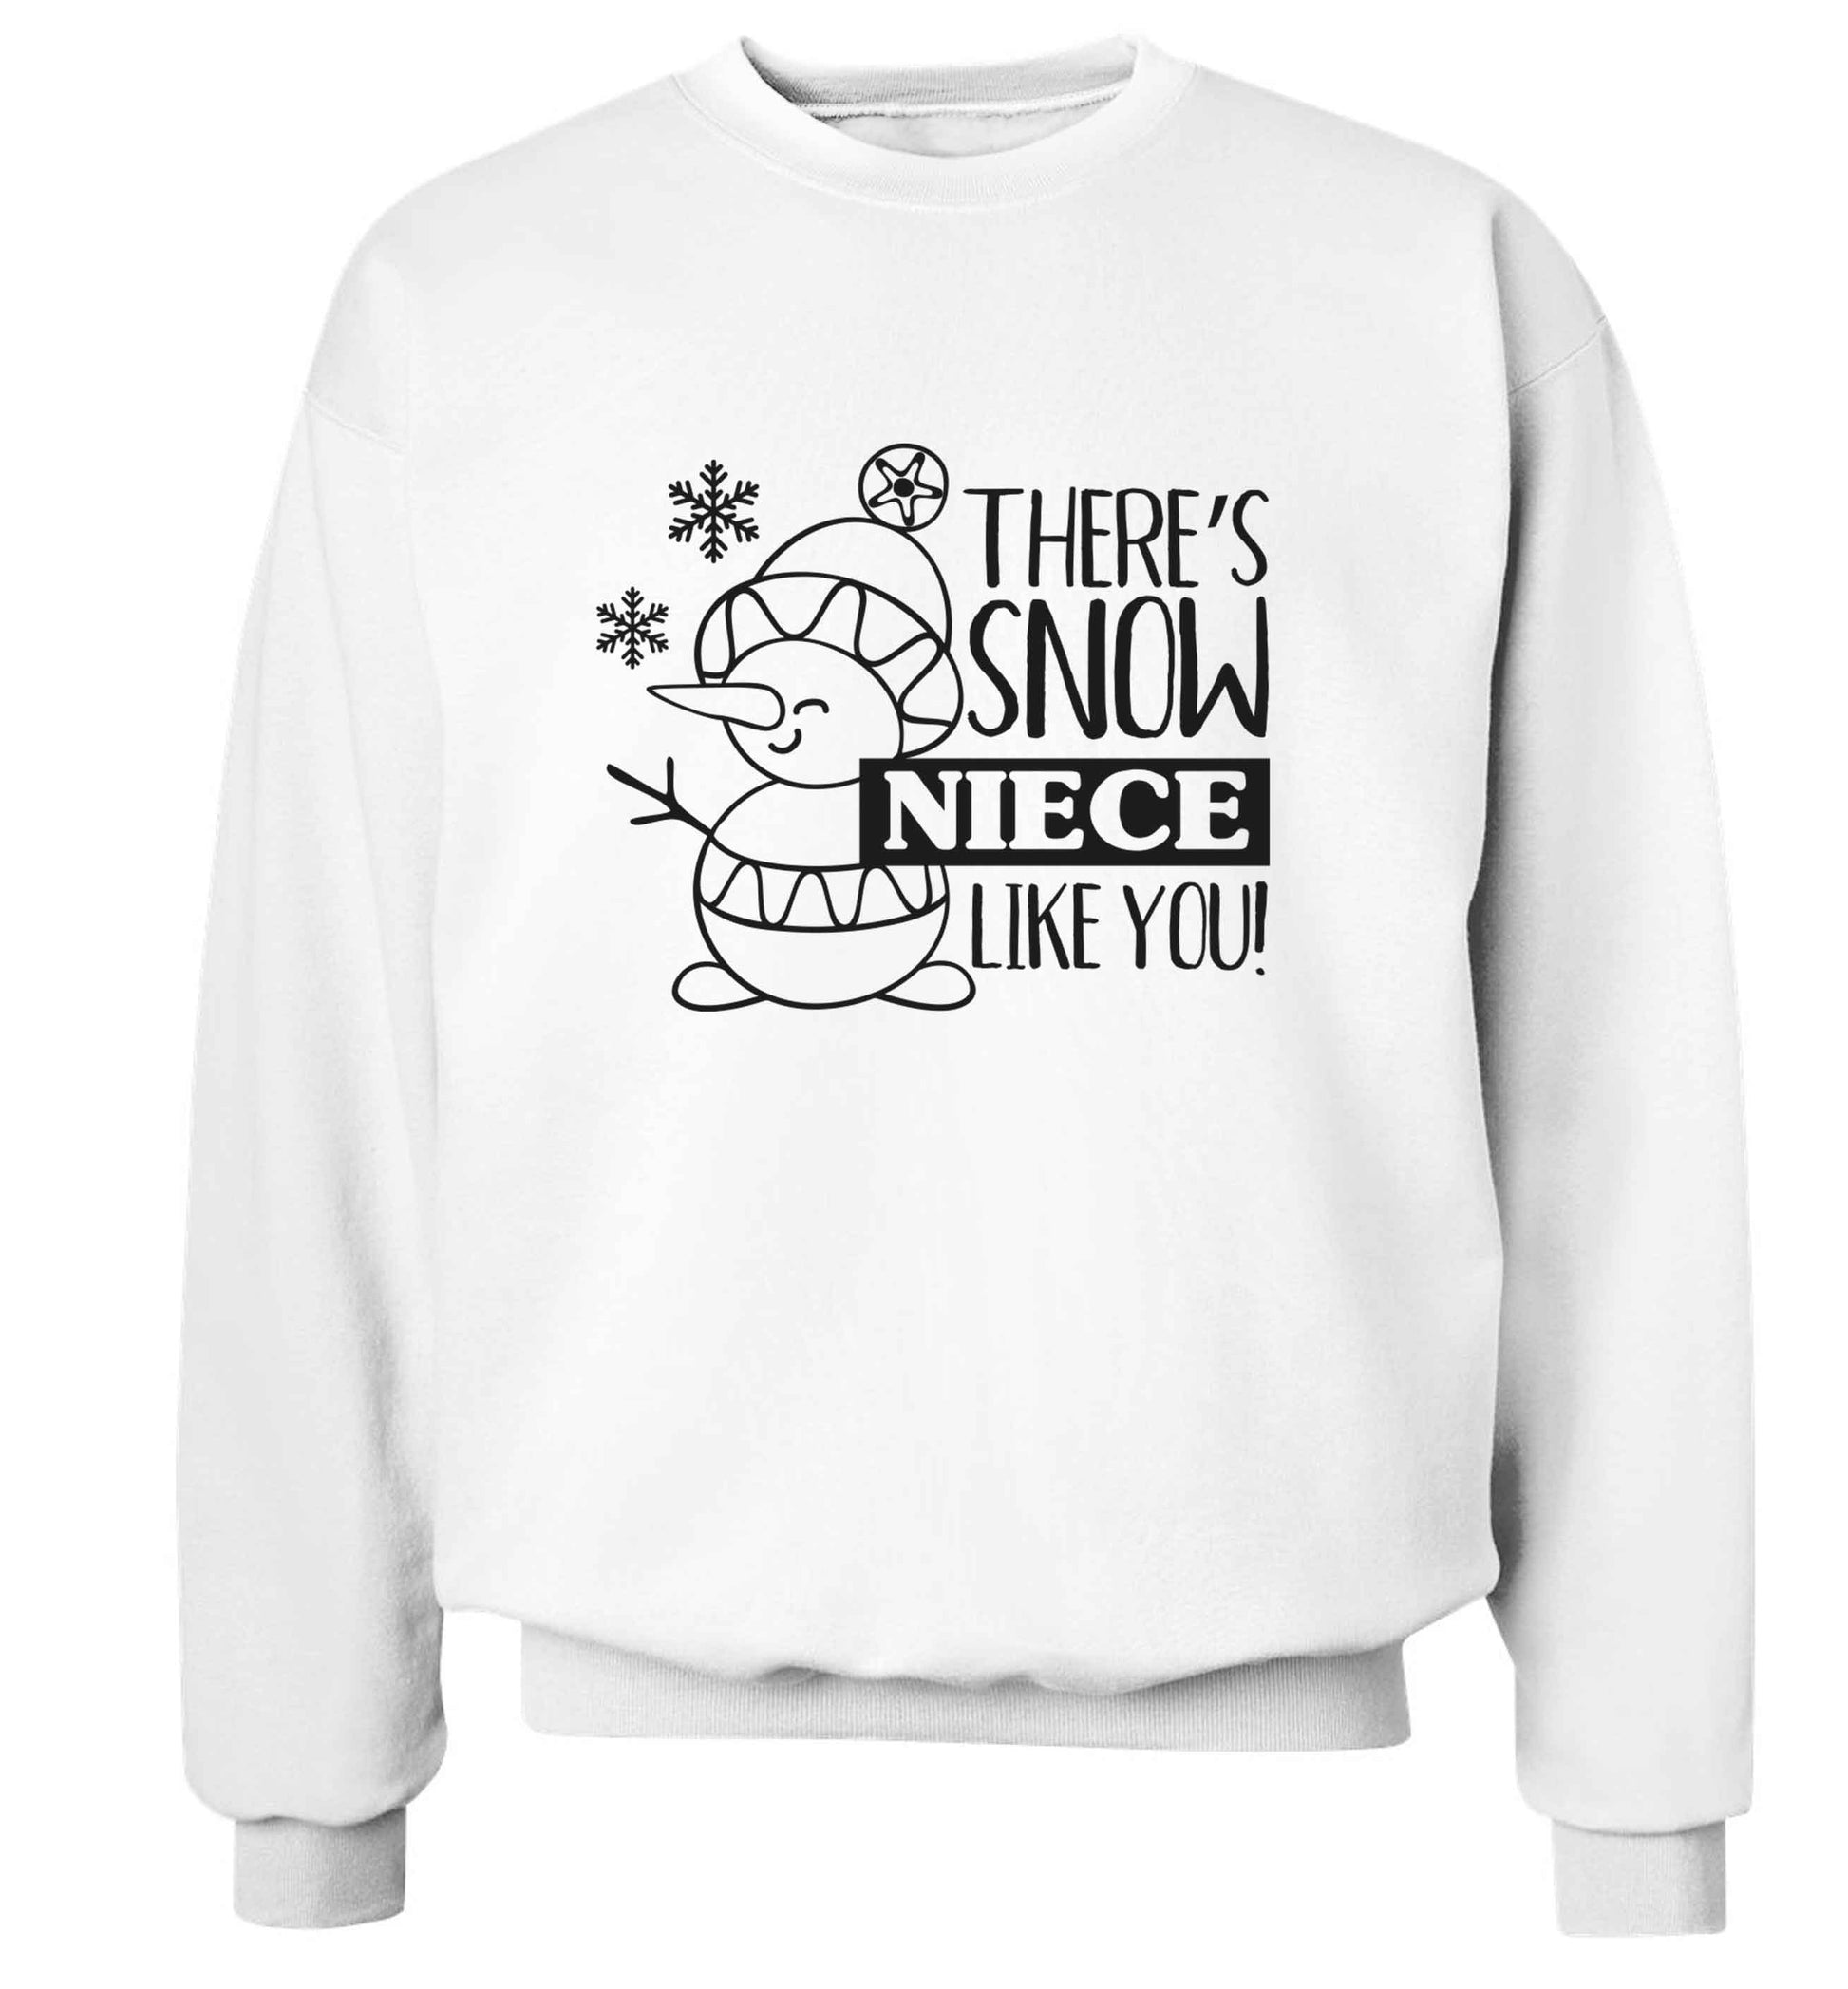 There's snow niece like you adult's unisex white sweater 2XL